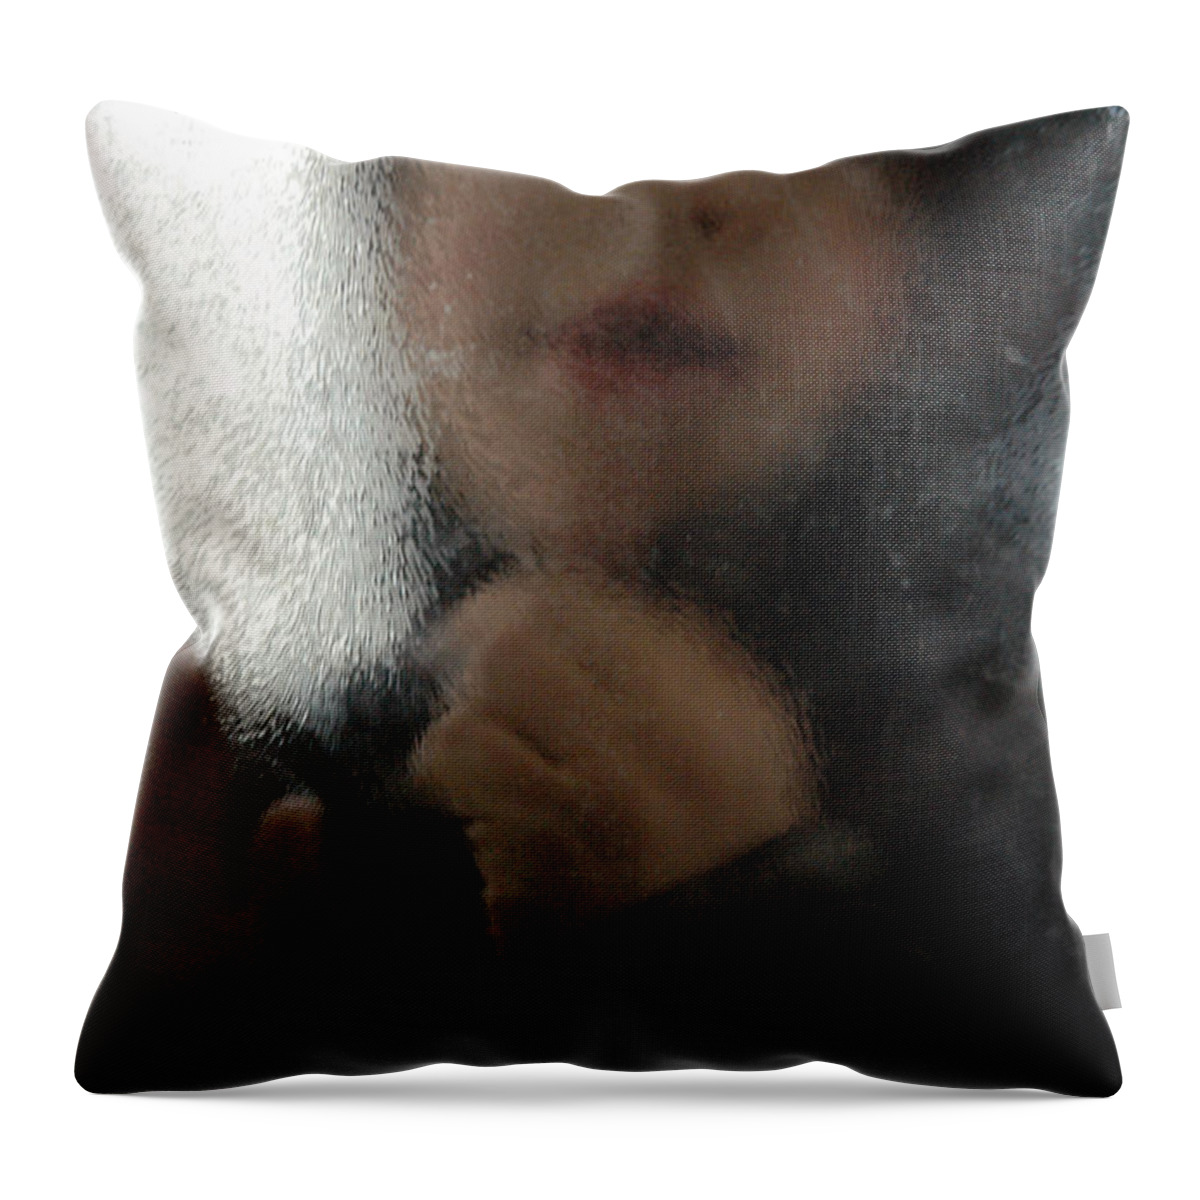 Boy Throw Pillow featuring the photograph Boy behind glass by Matthias Hauser